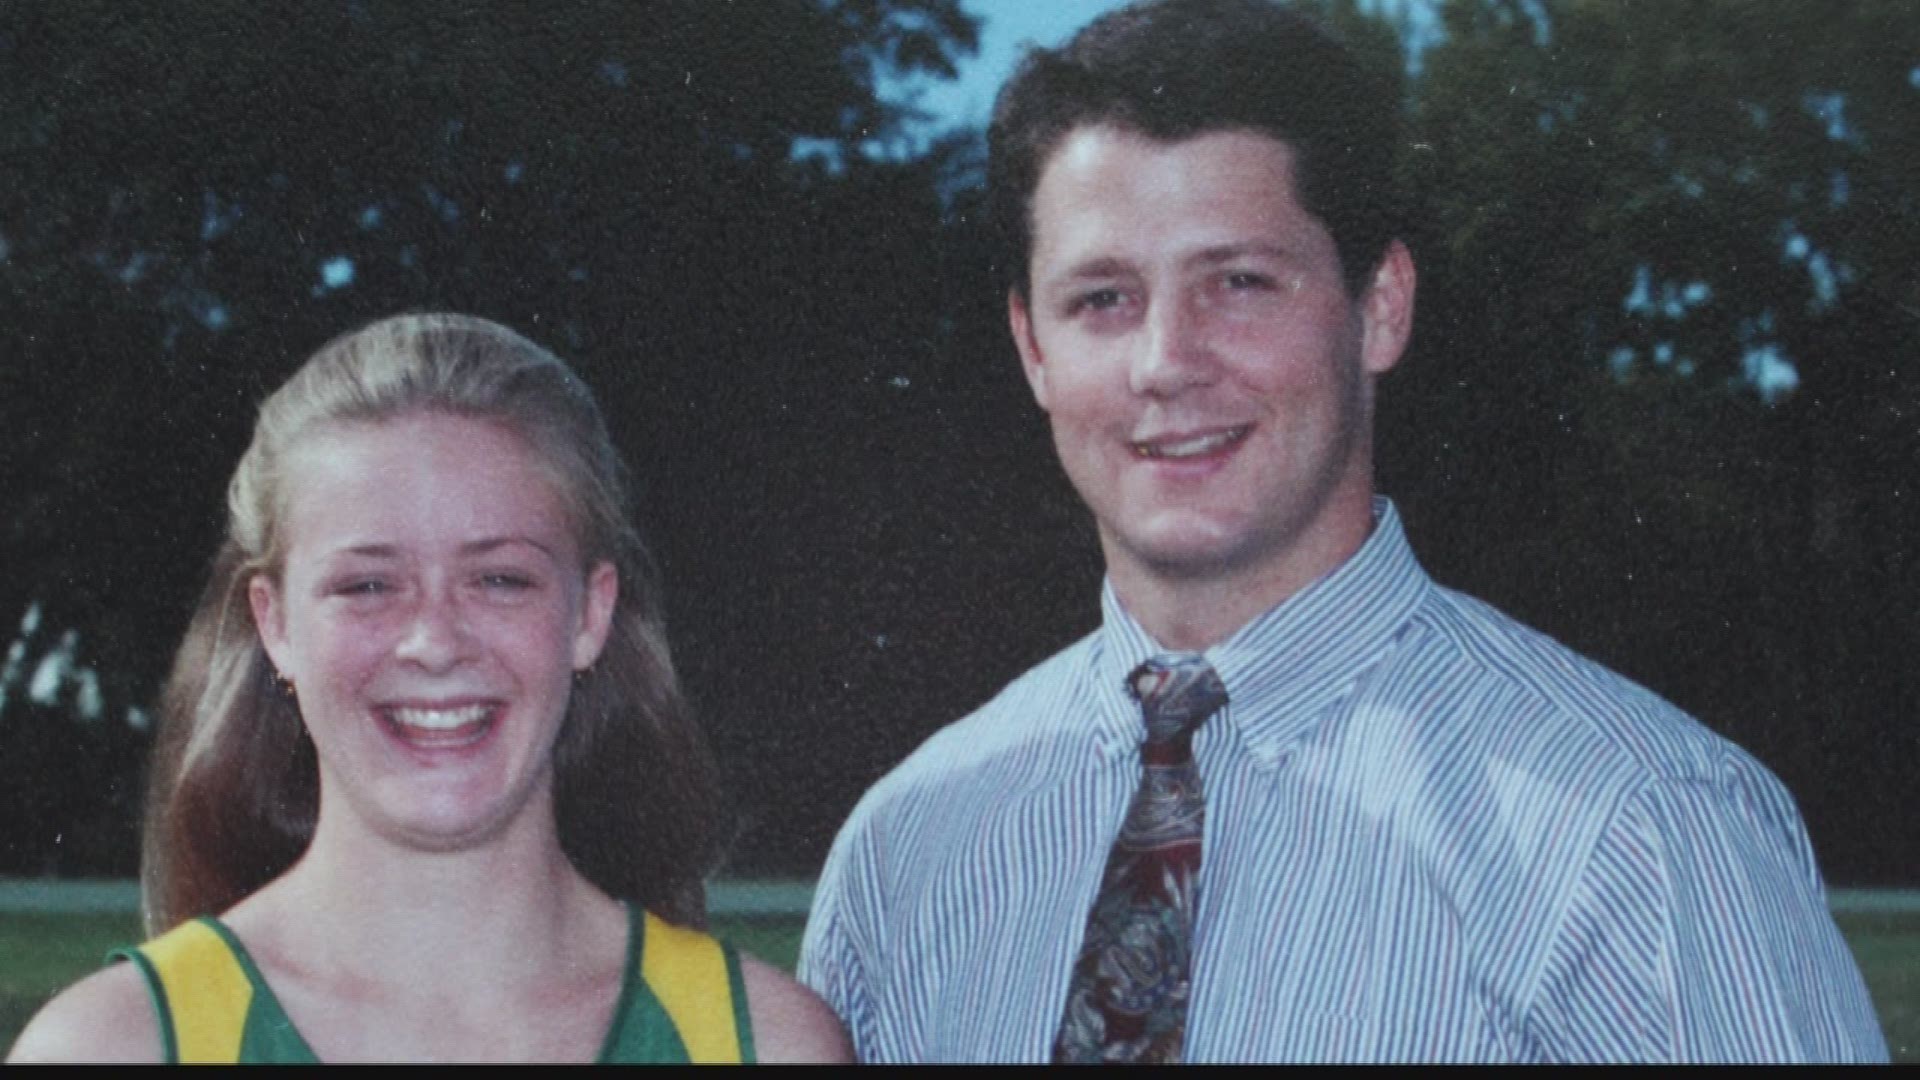 He was a trusted high school coach, she was his star runner. But there were rumors that they were more than student and teacher.